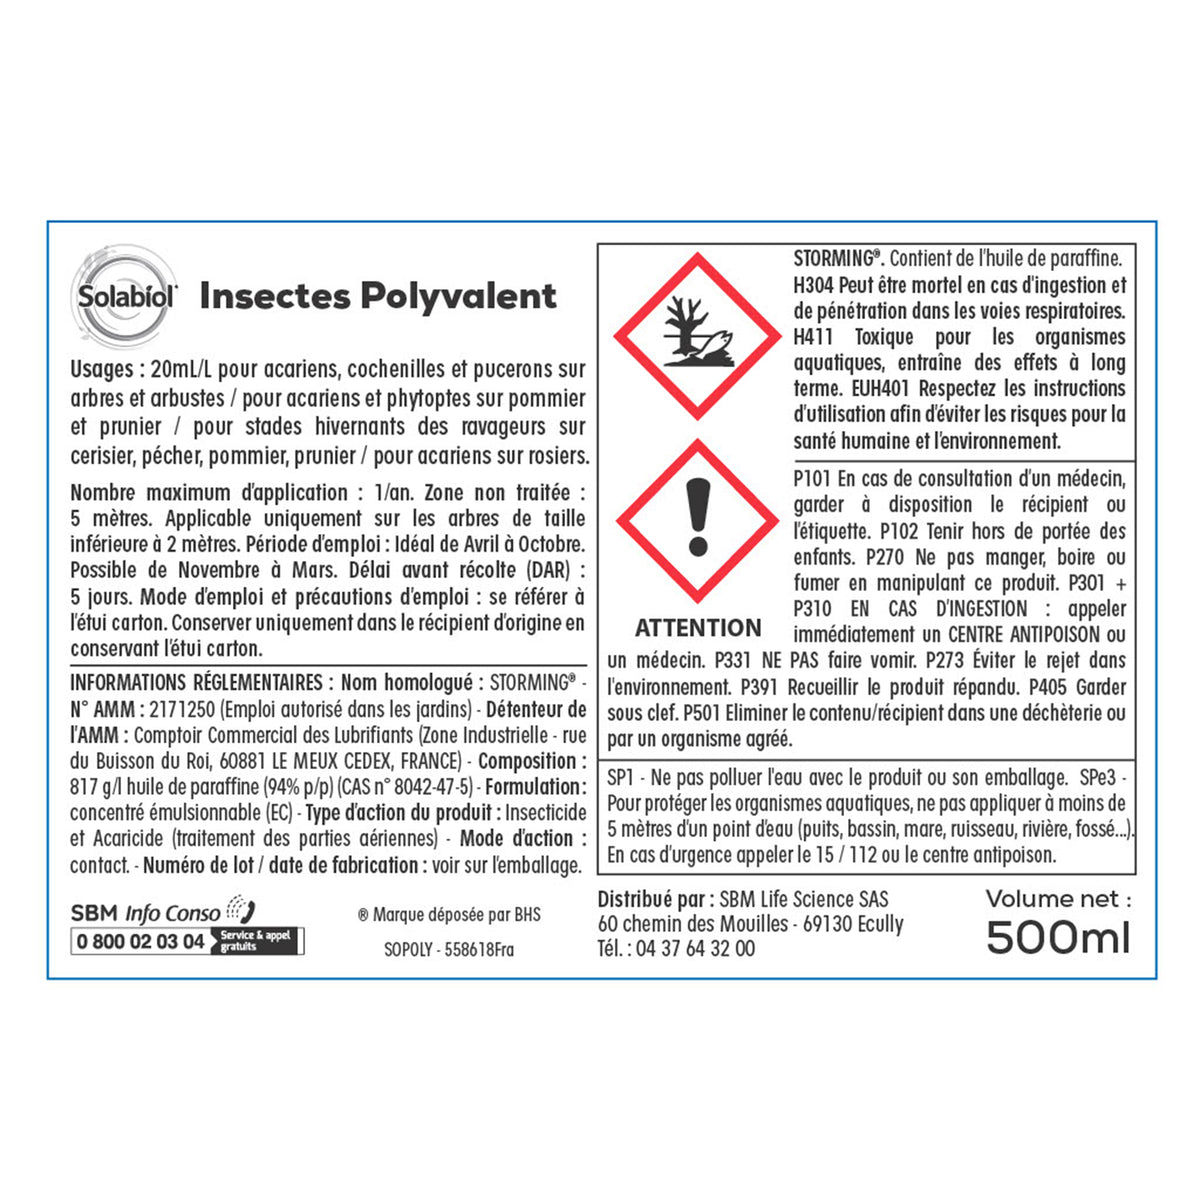 Insecticide polyvalent SOLABIOL